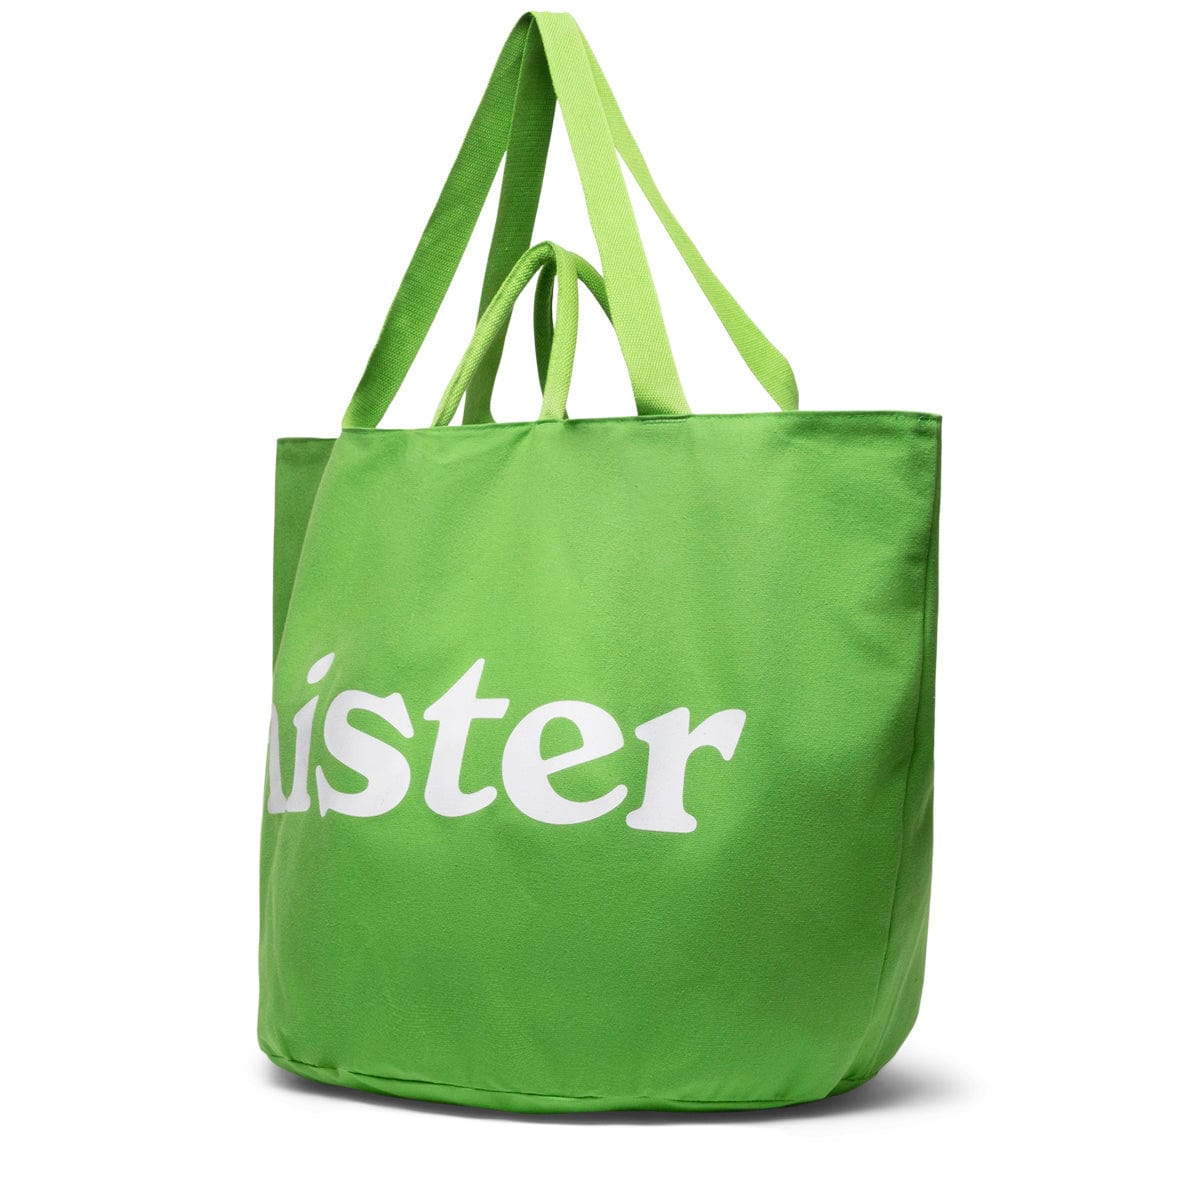 Mister Green Bags GREEN / O/S ROUND TOTE/GROW POT